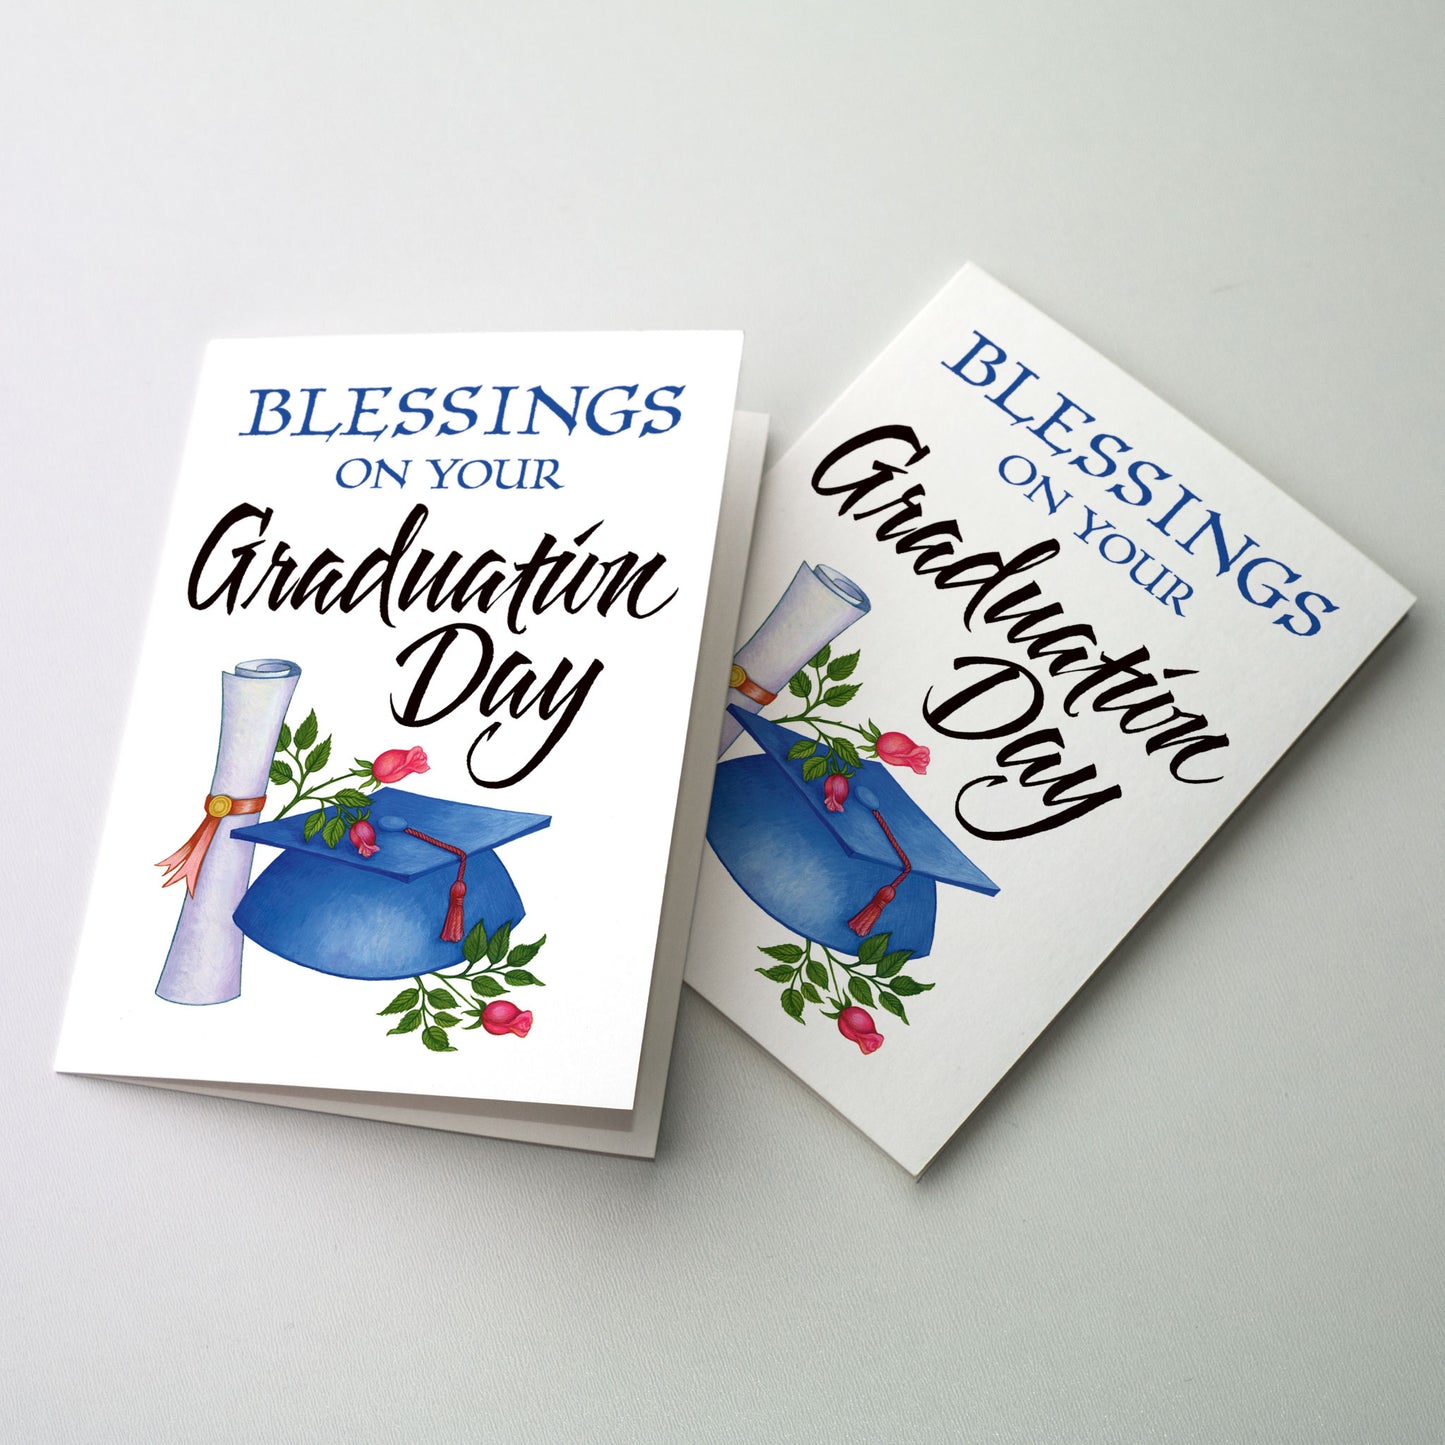 Blessings on Your Graduation Day - Graduation Card